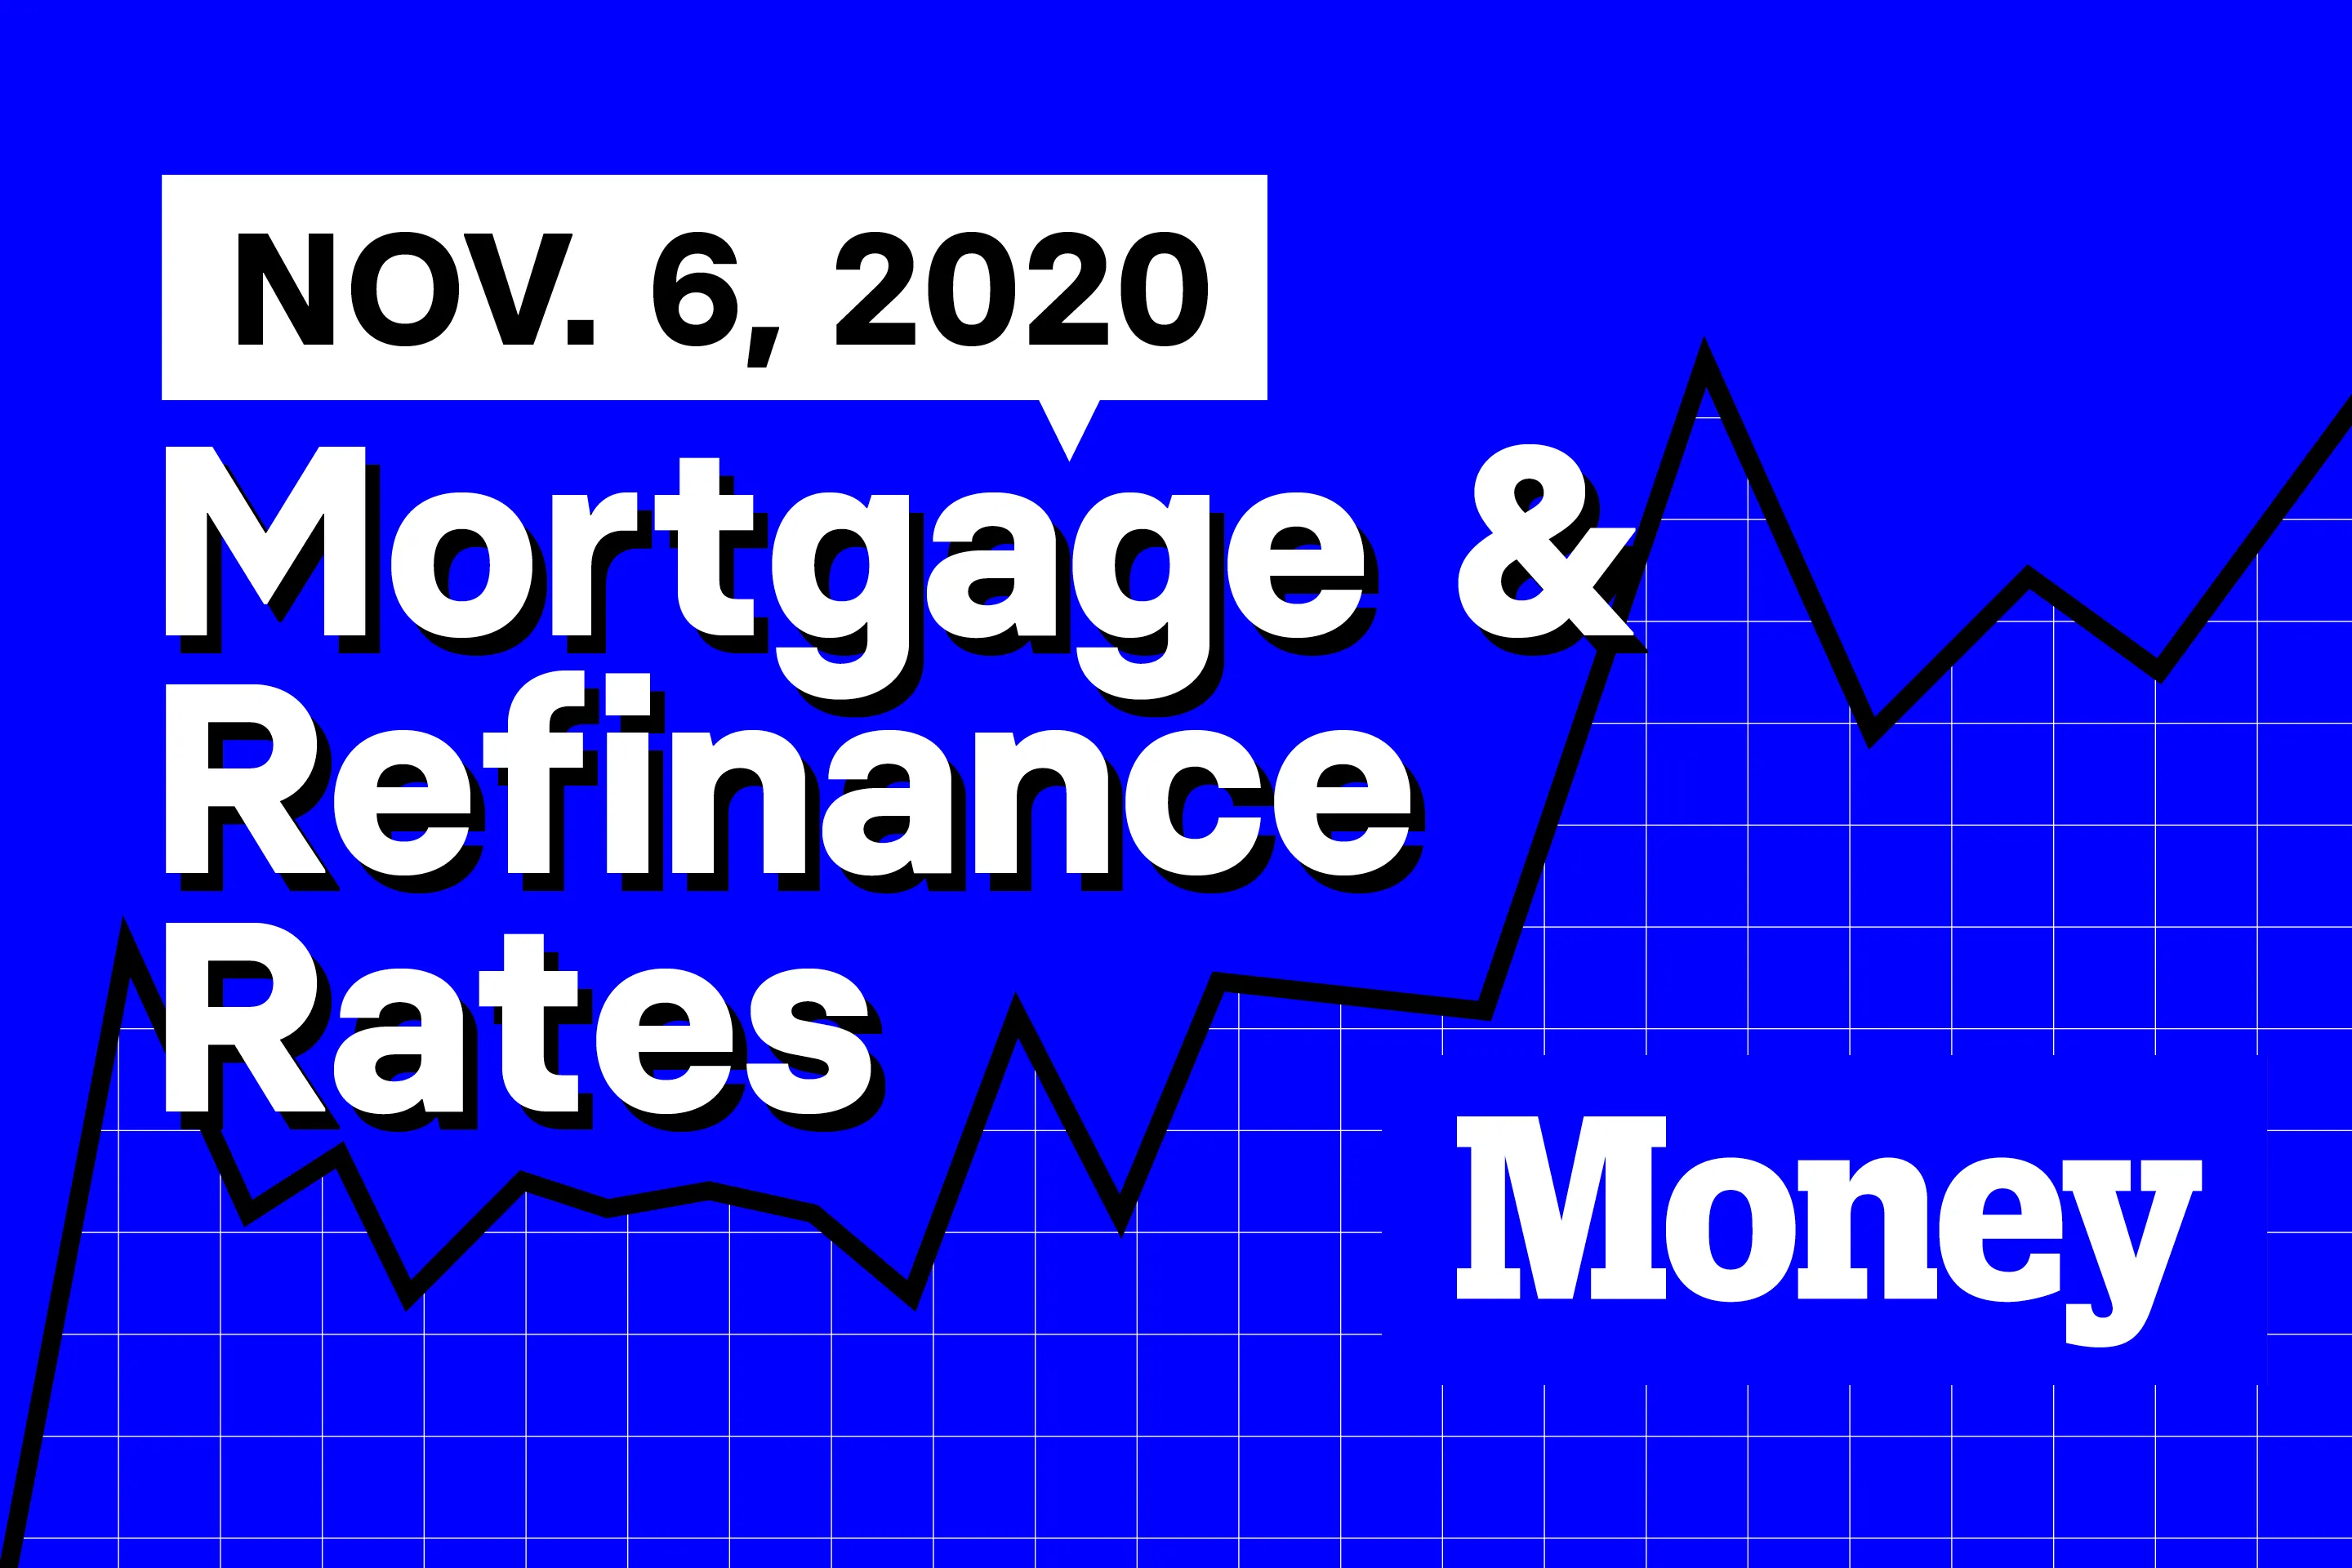 Here Are Today's Best Mortgage & Refinance Rates for November 6, 2020